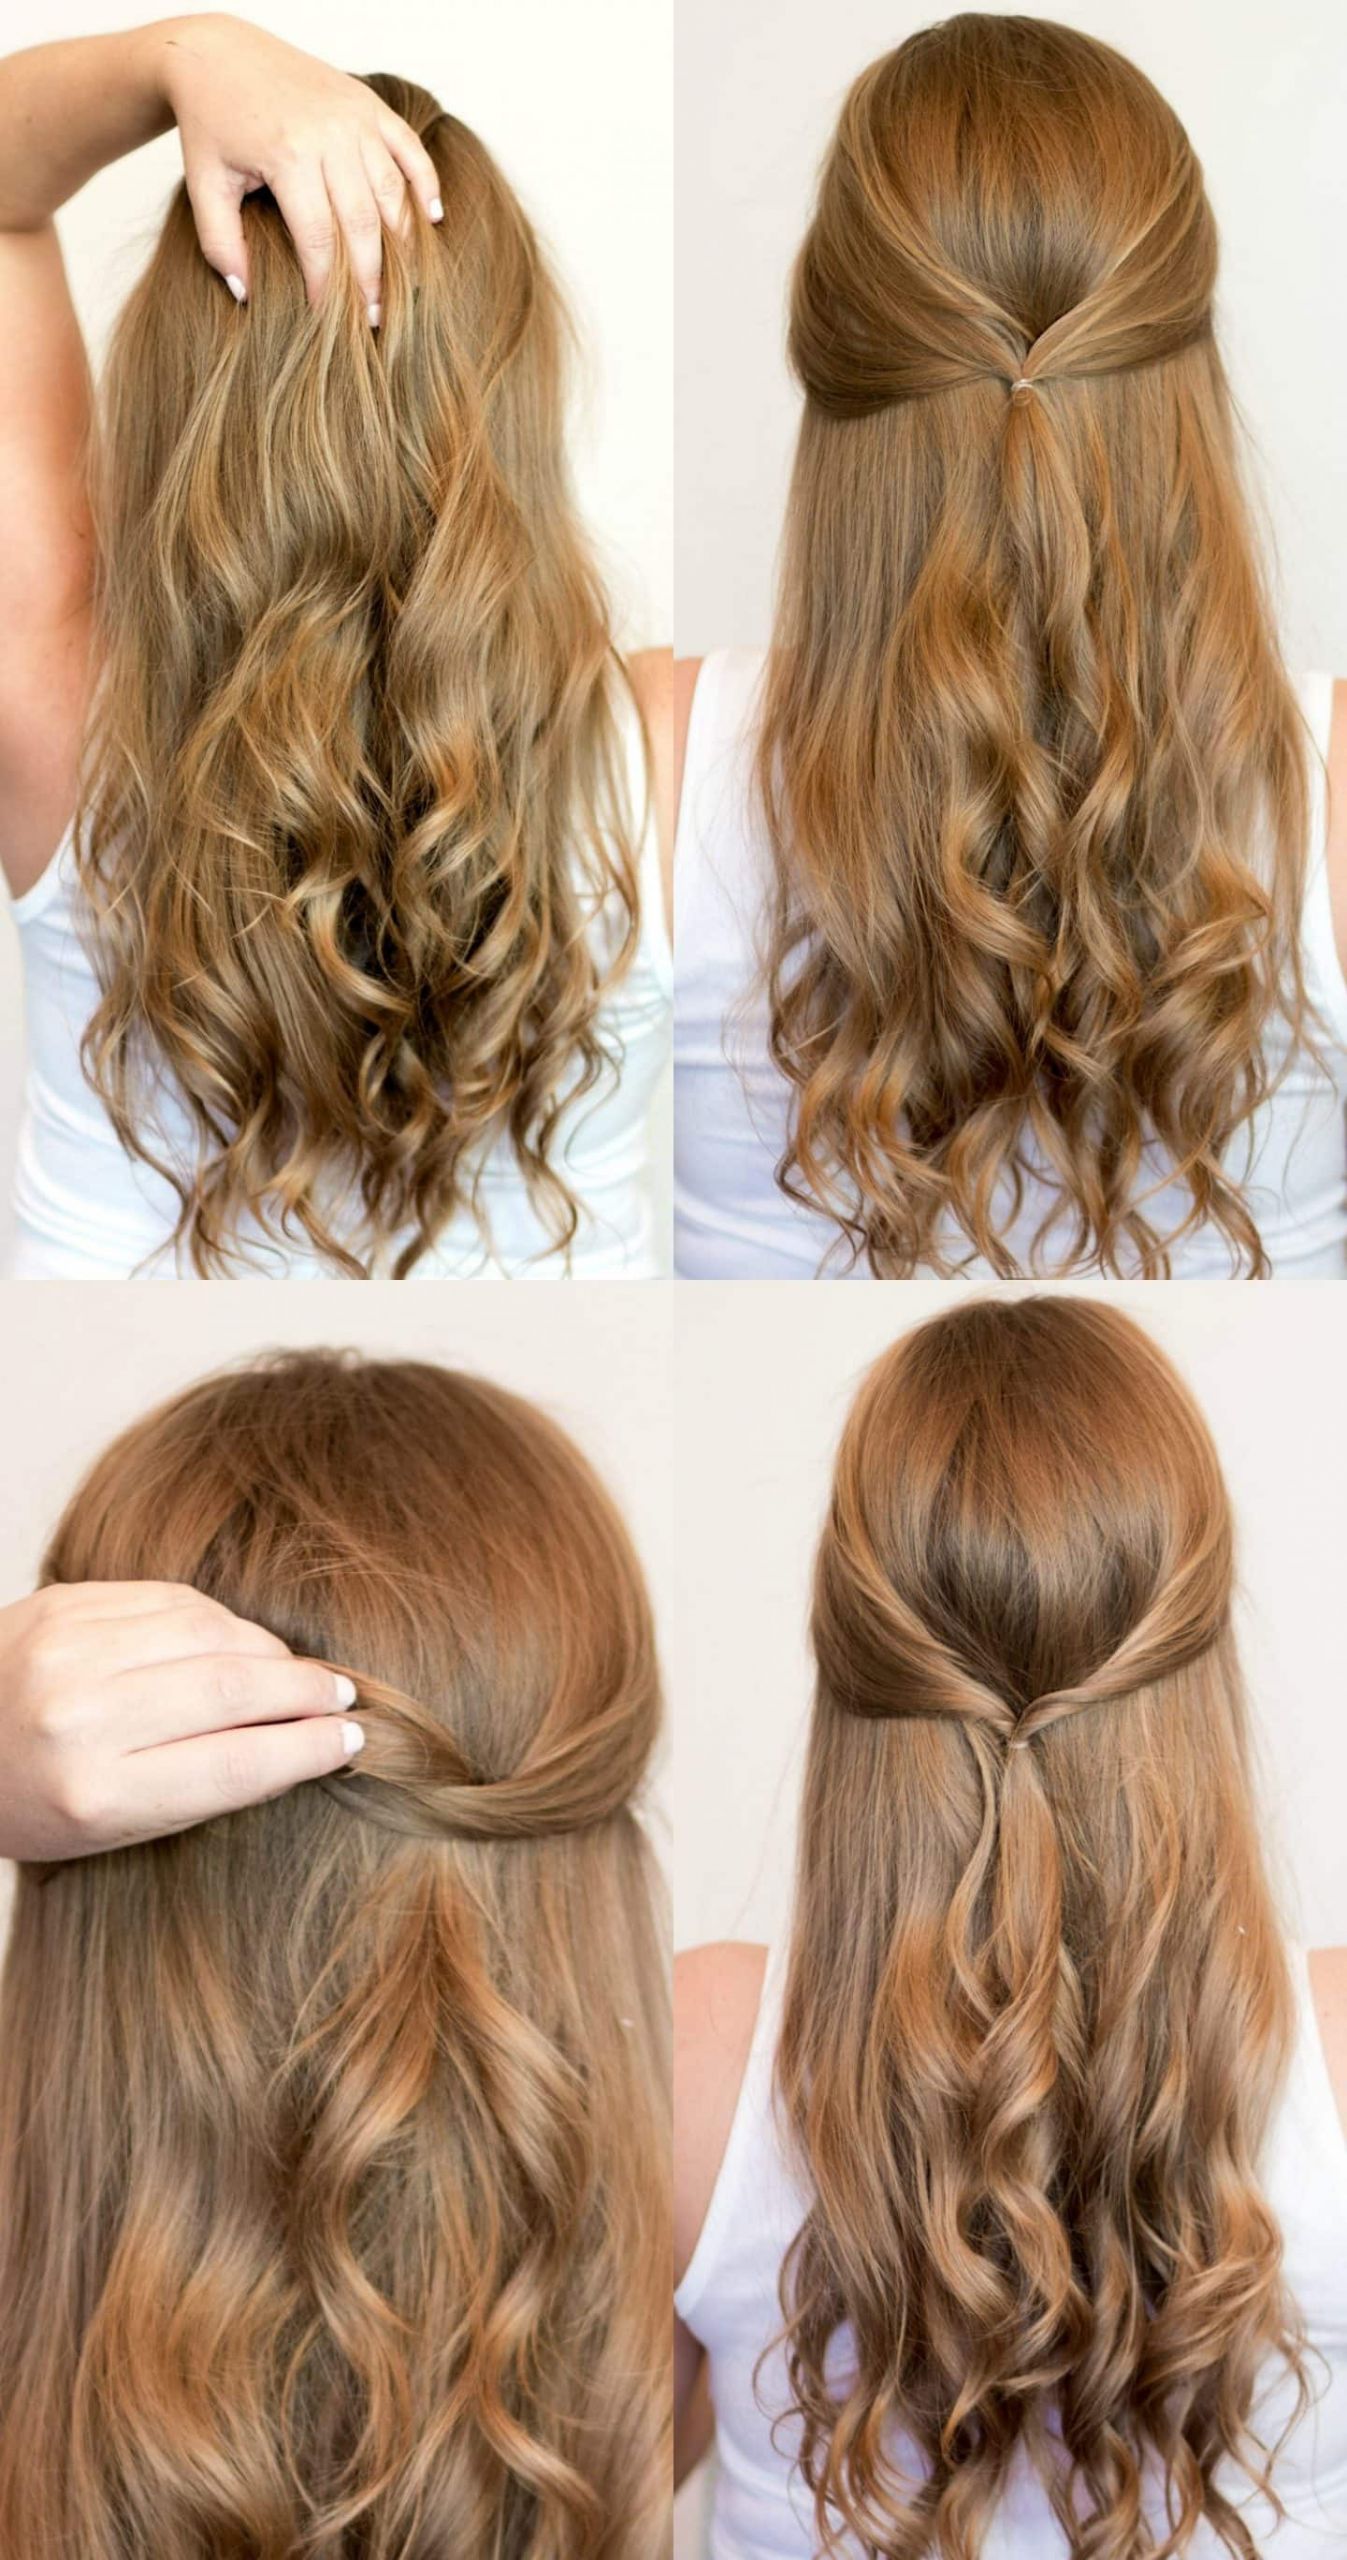 Pretty Easy Hairstyles
 Easy Heatless Hairstyles for Long Hair